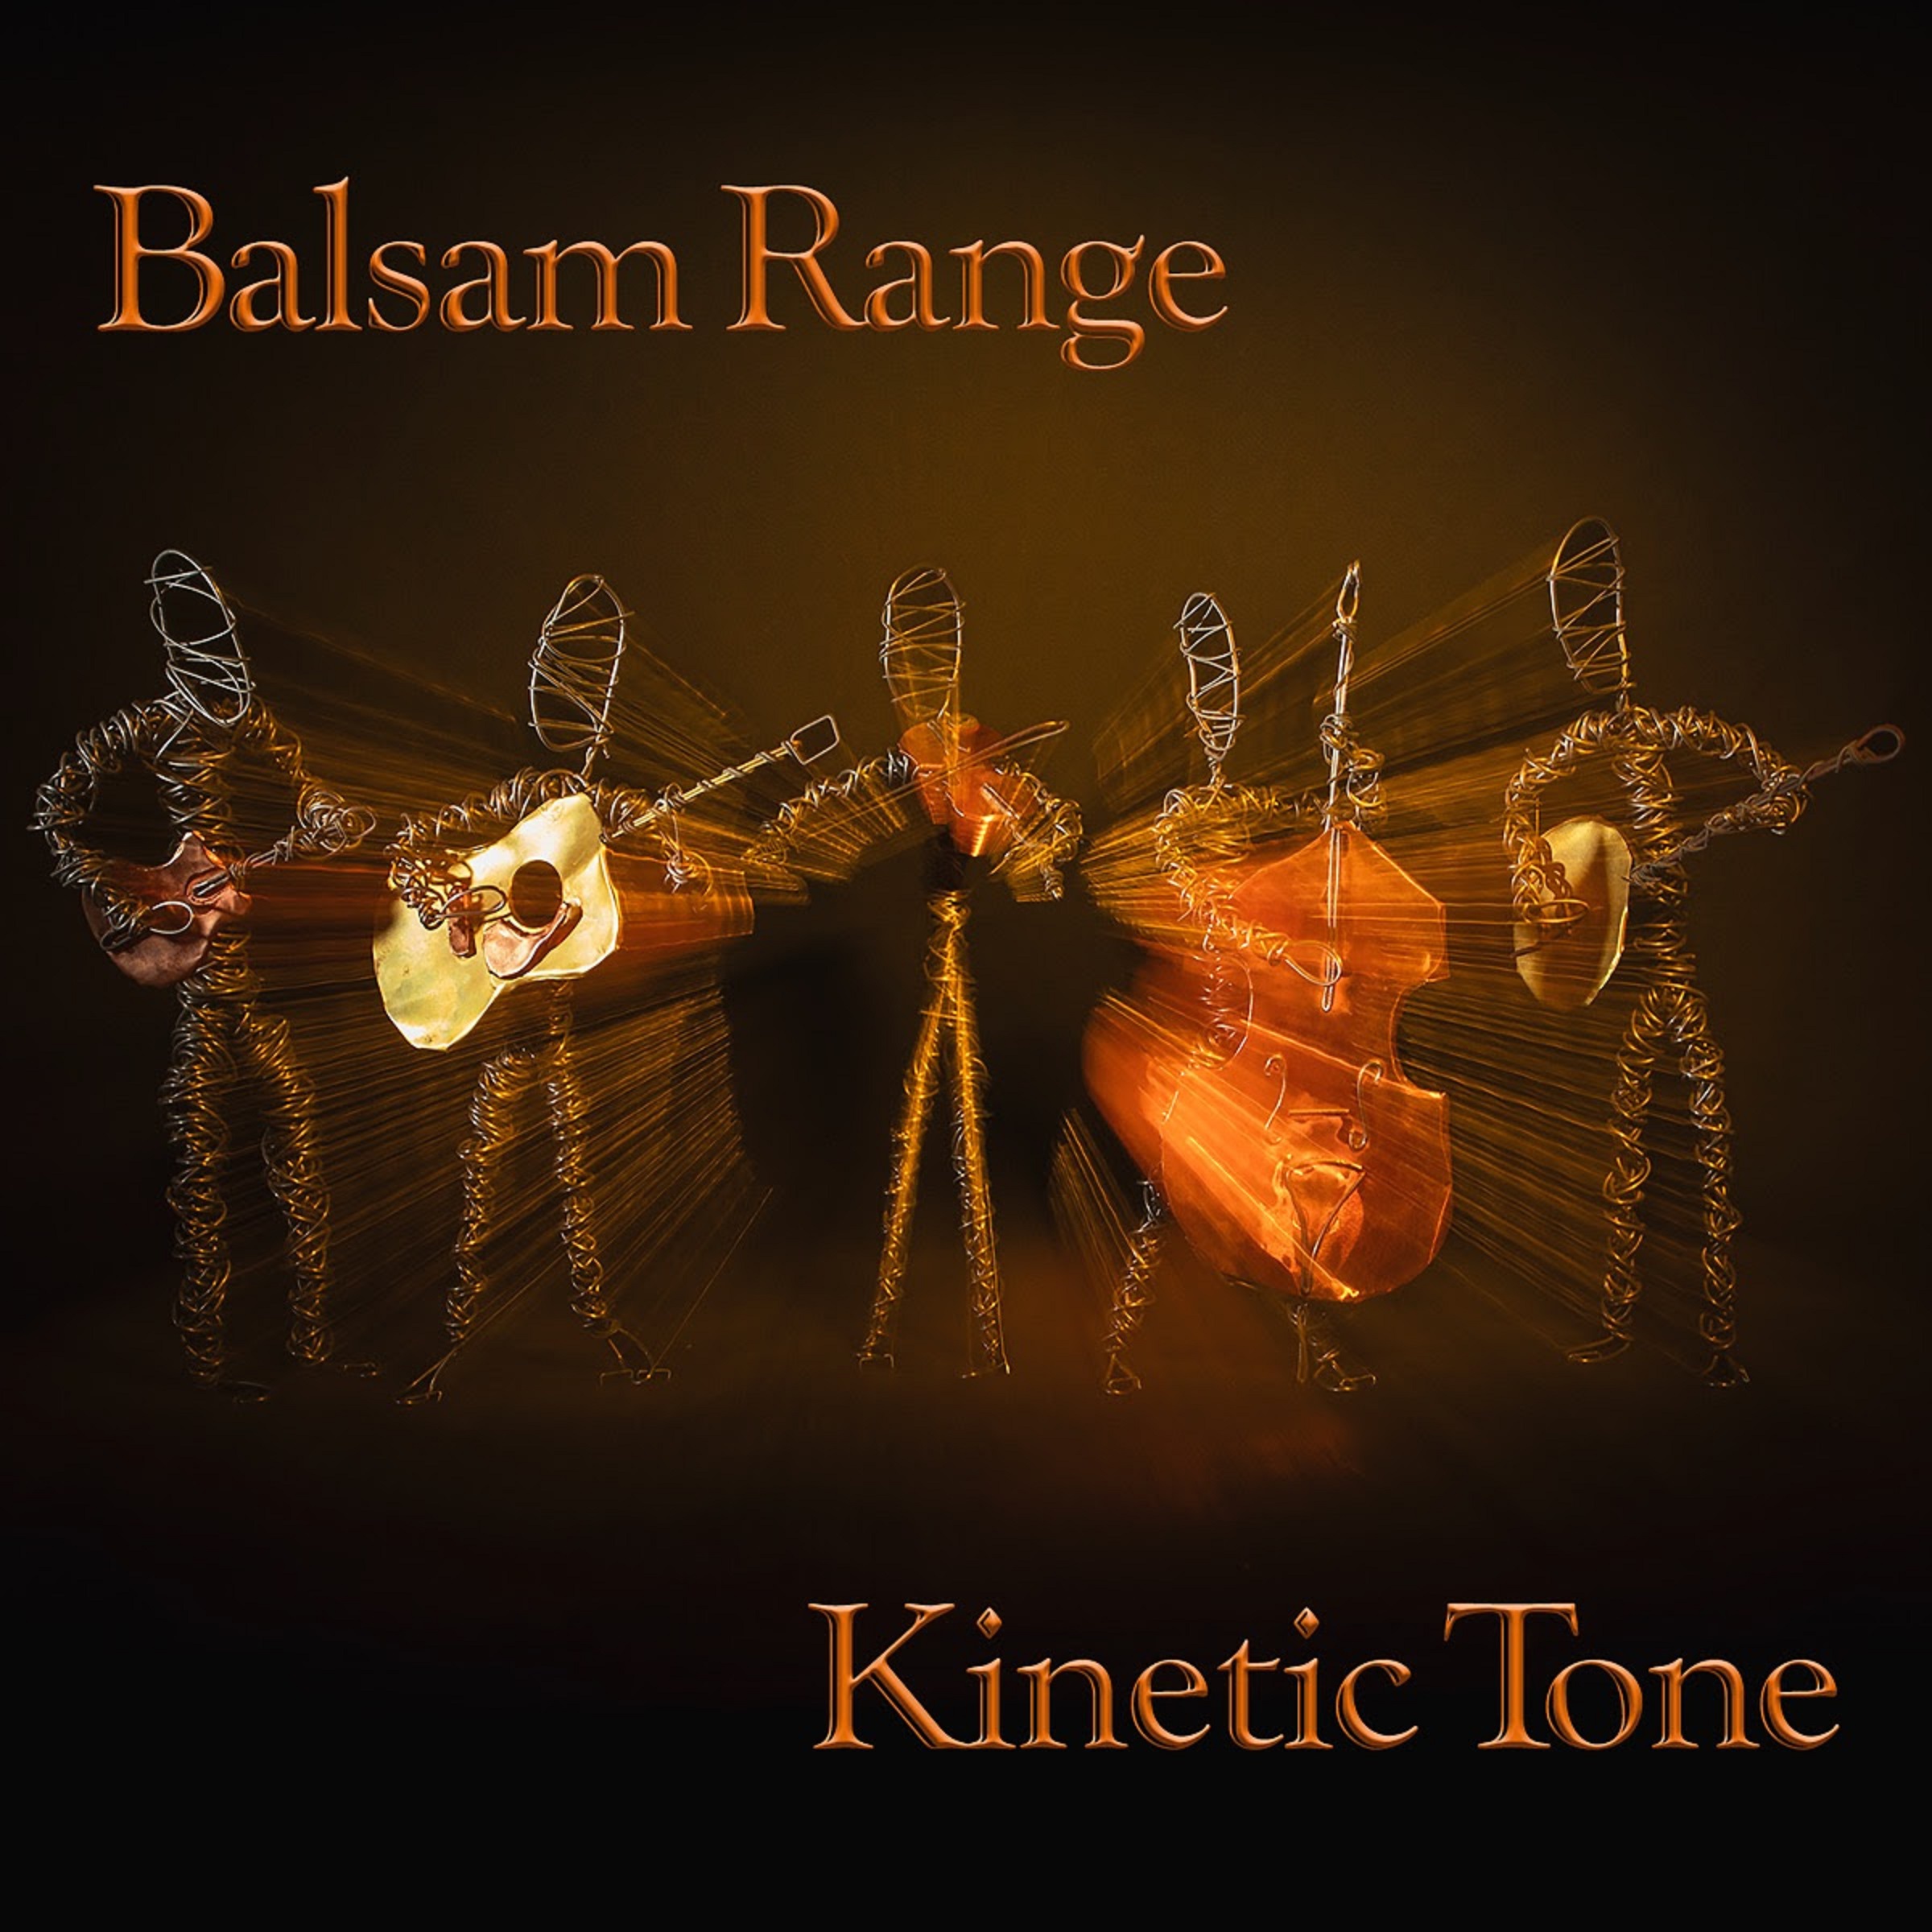 Balsam Range brings newly invigorated mindset to Kinetic Tone, out now